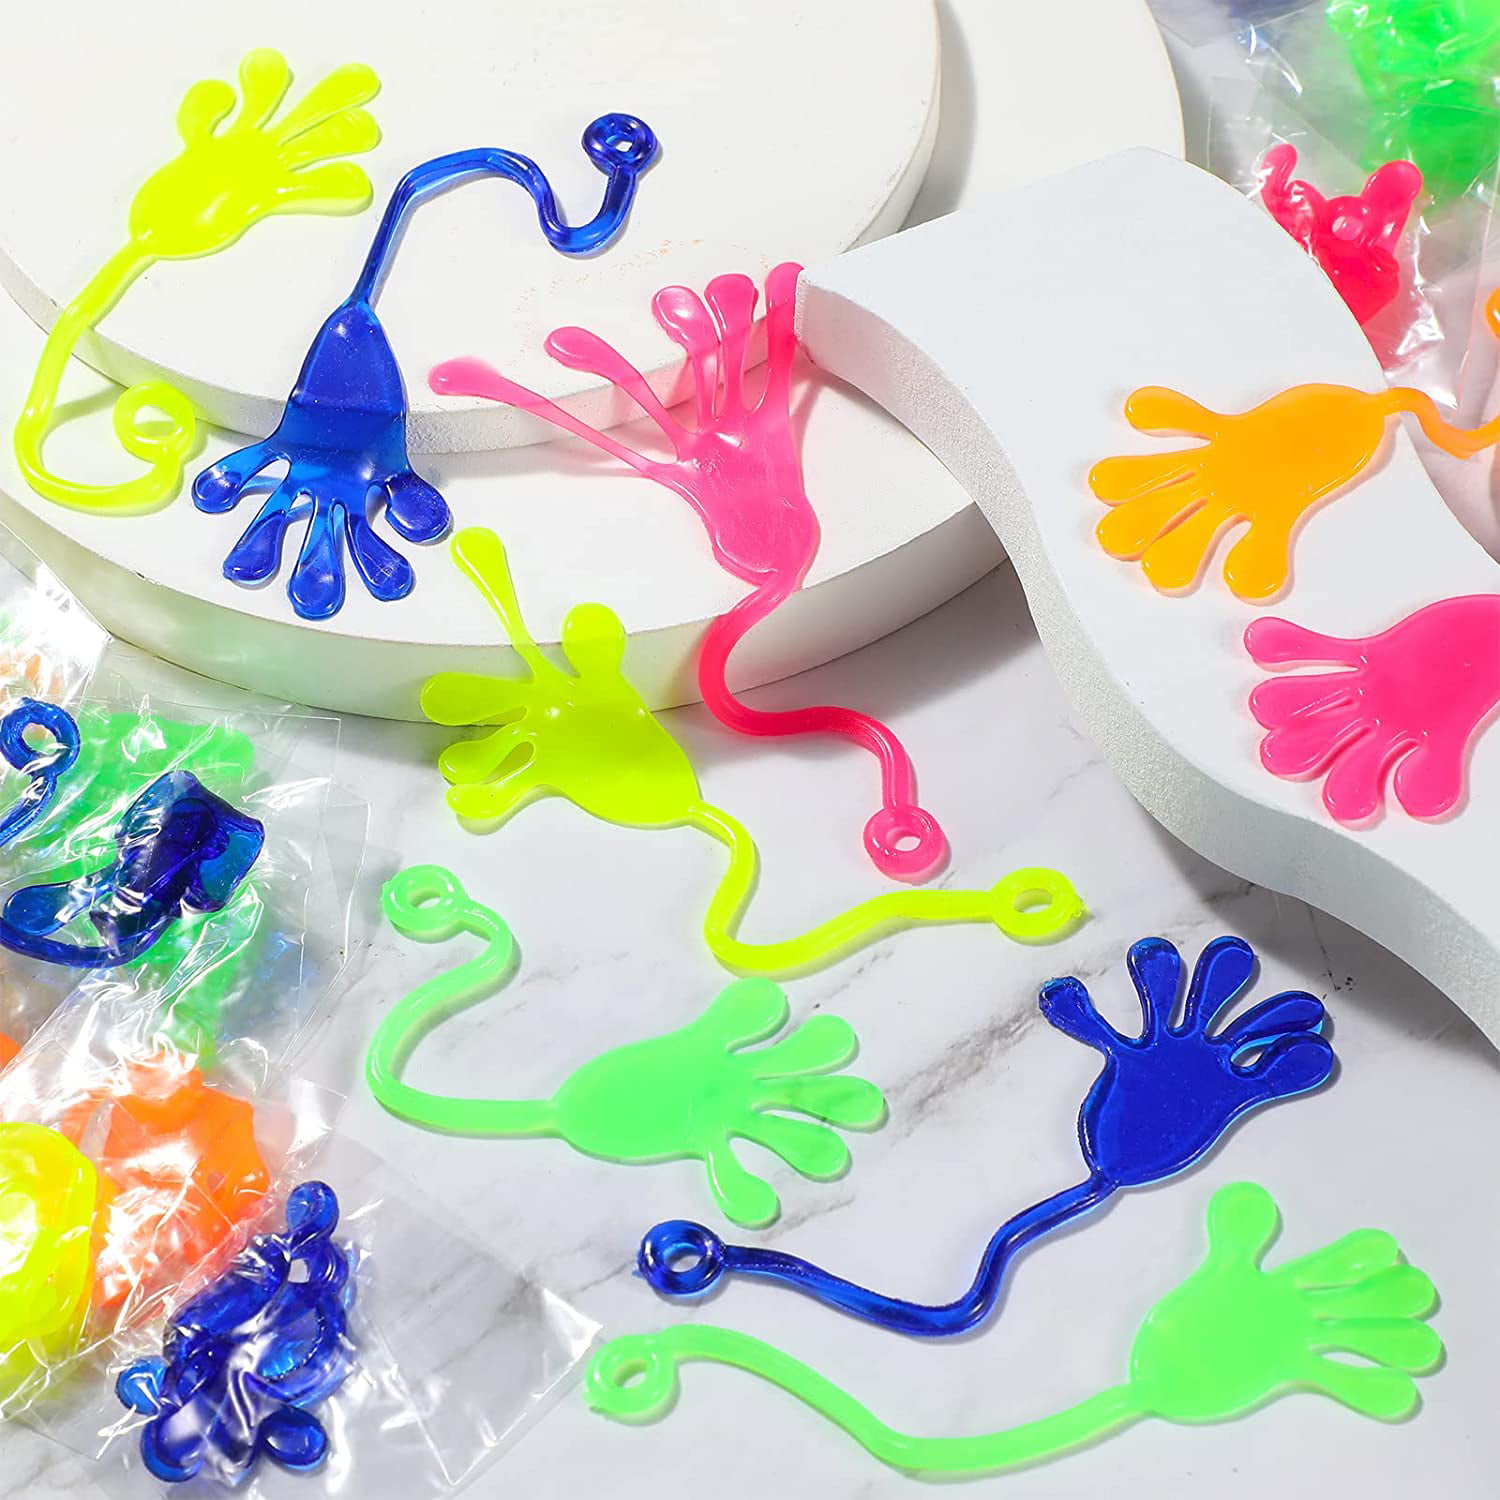  48PCS Sticky Hands Bulk Party Favors for Kids 4-8 8-12 Stretchy  Sticky Hand Fidget Toys Easter Basket Stuffers Kids Goodie Bag Stuffers  Treasure Box Toys for Classroom Prizes Birthday Party Supplies 